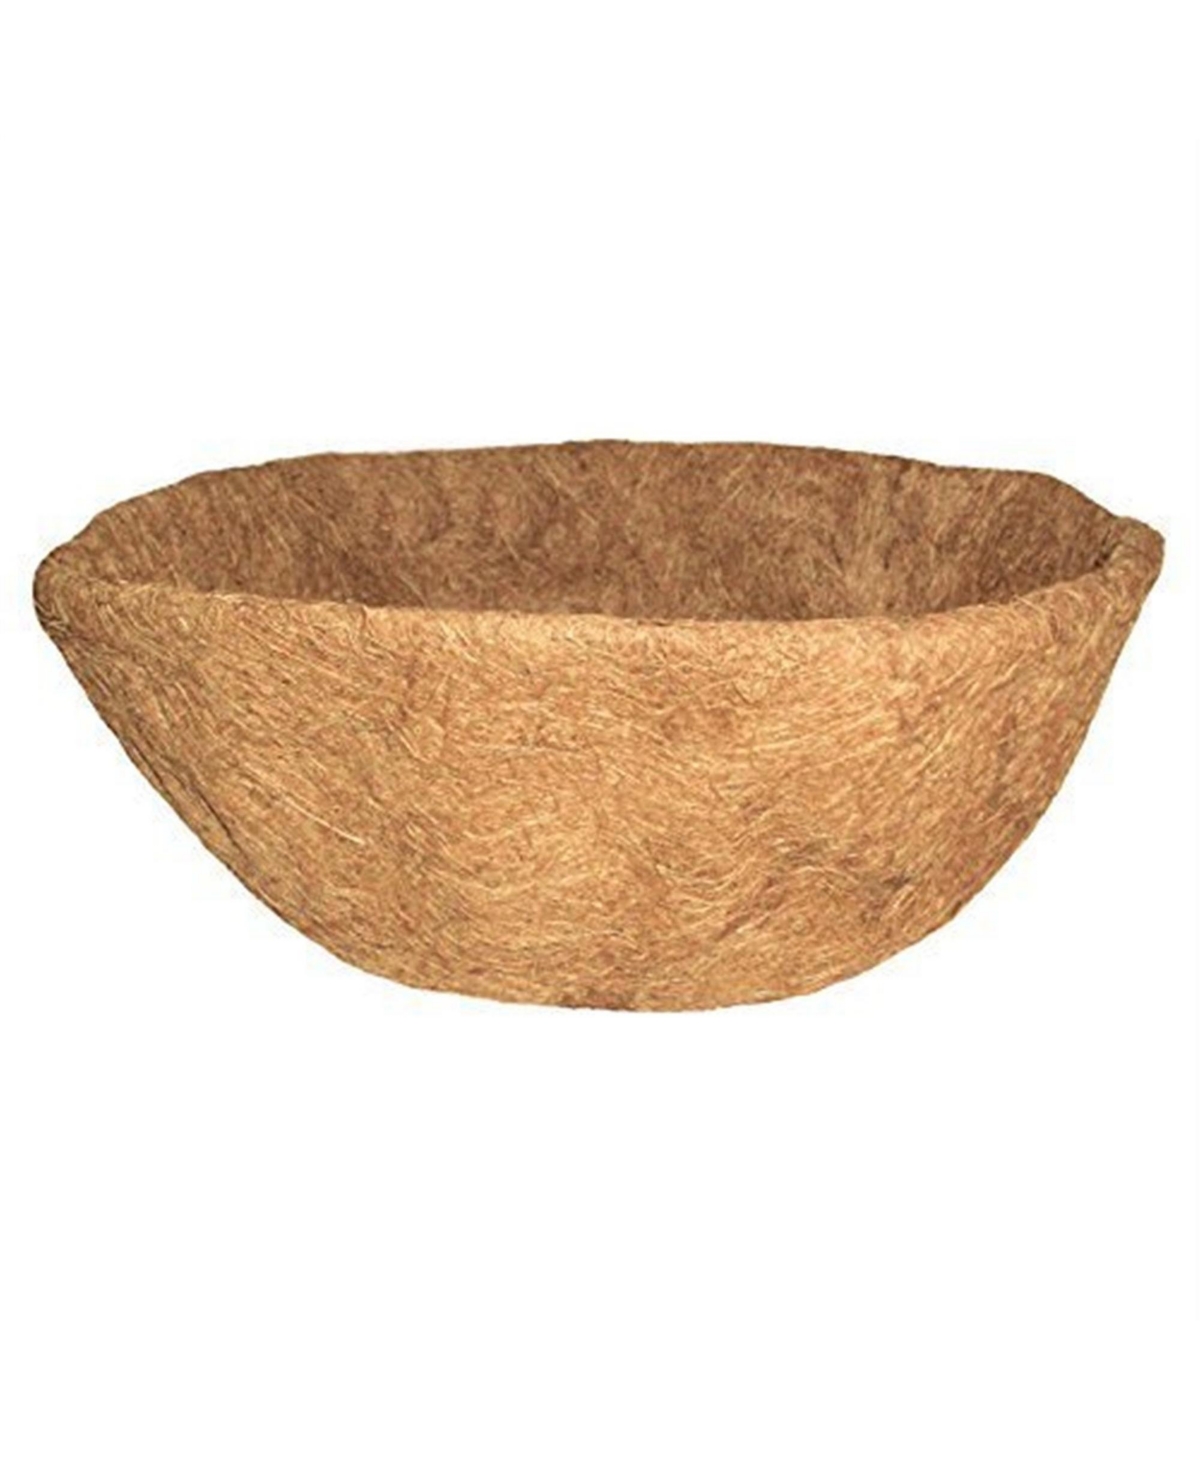 Coconut Arts Basket Shaped Coco Liner, 20 Inch - Brown